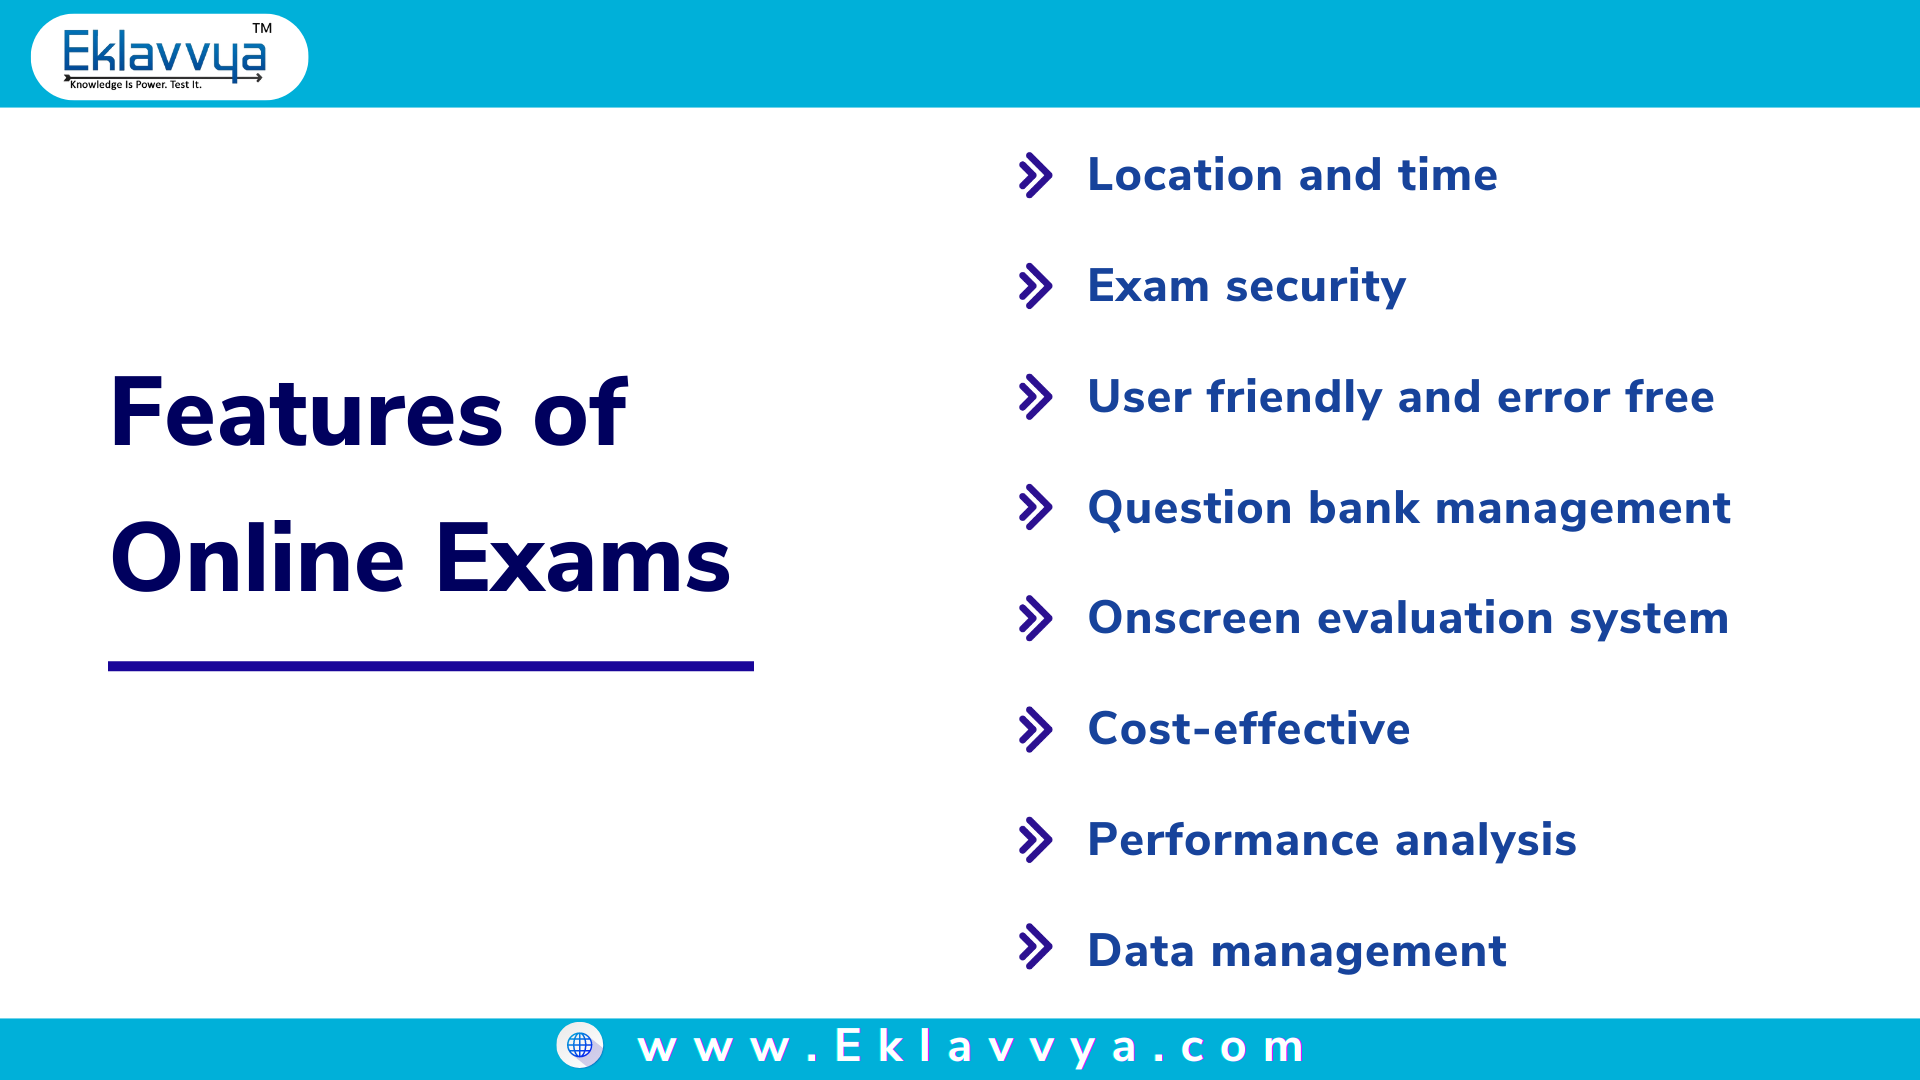 Features of online exams